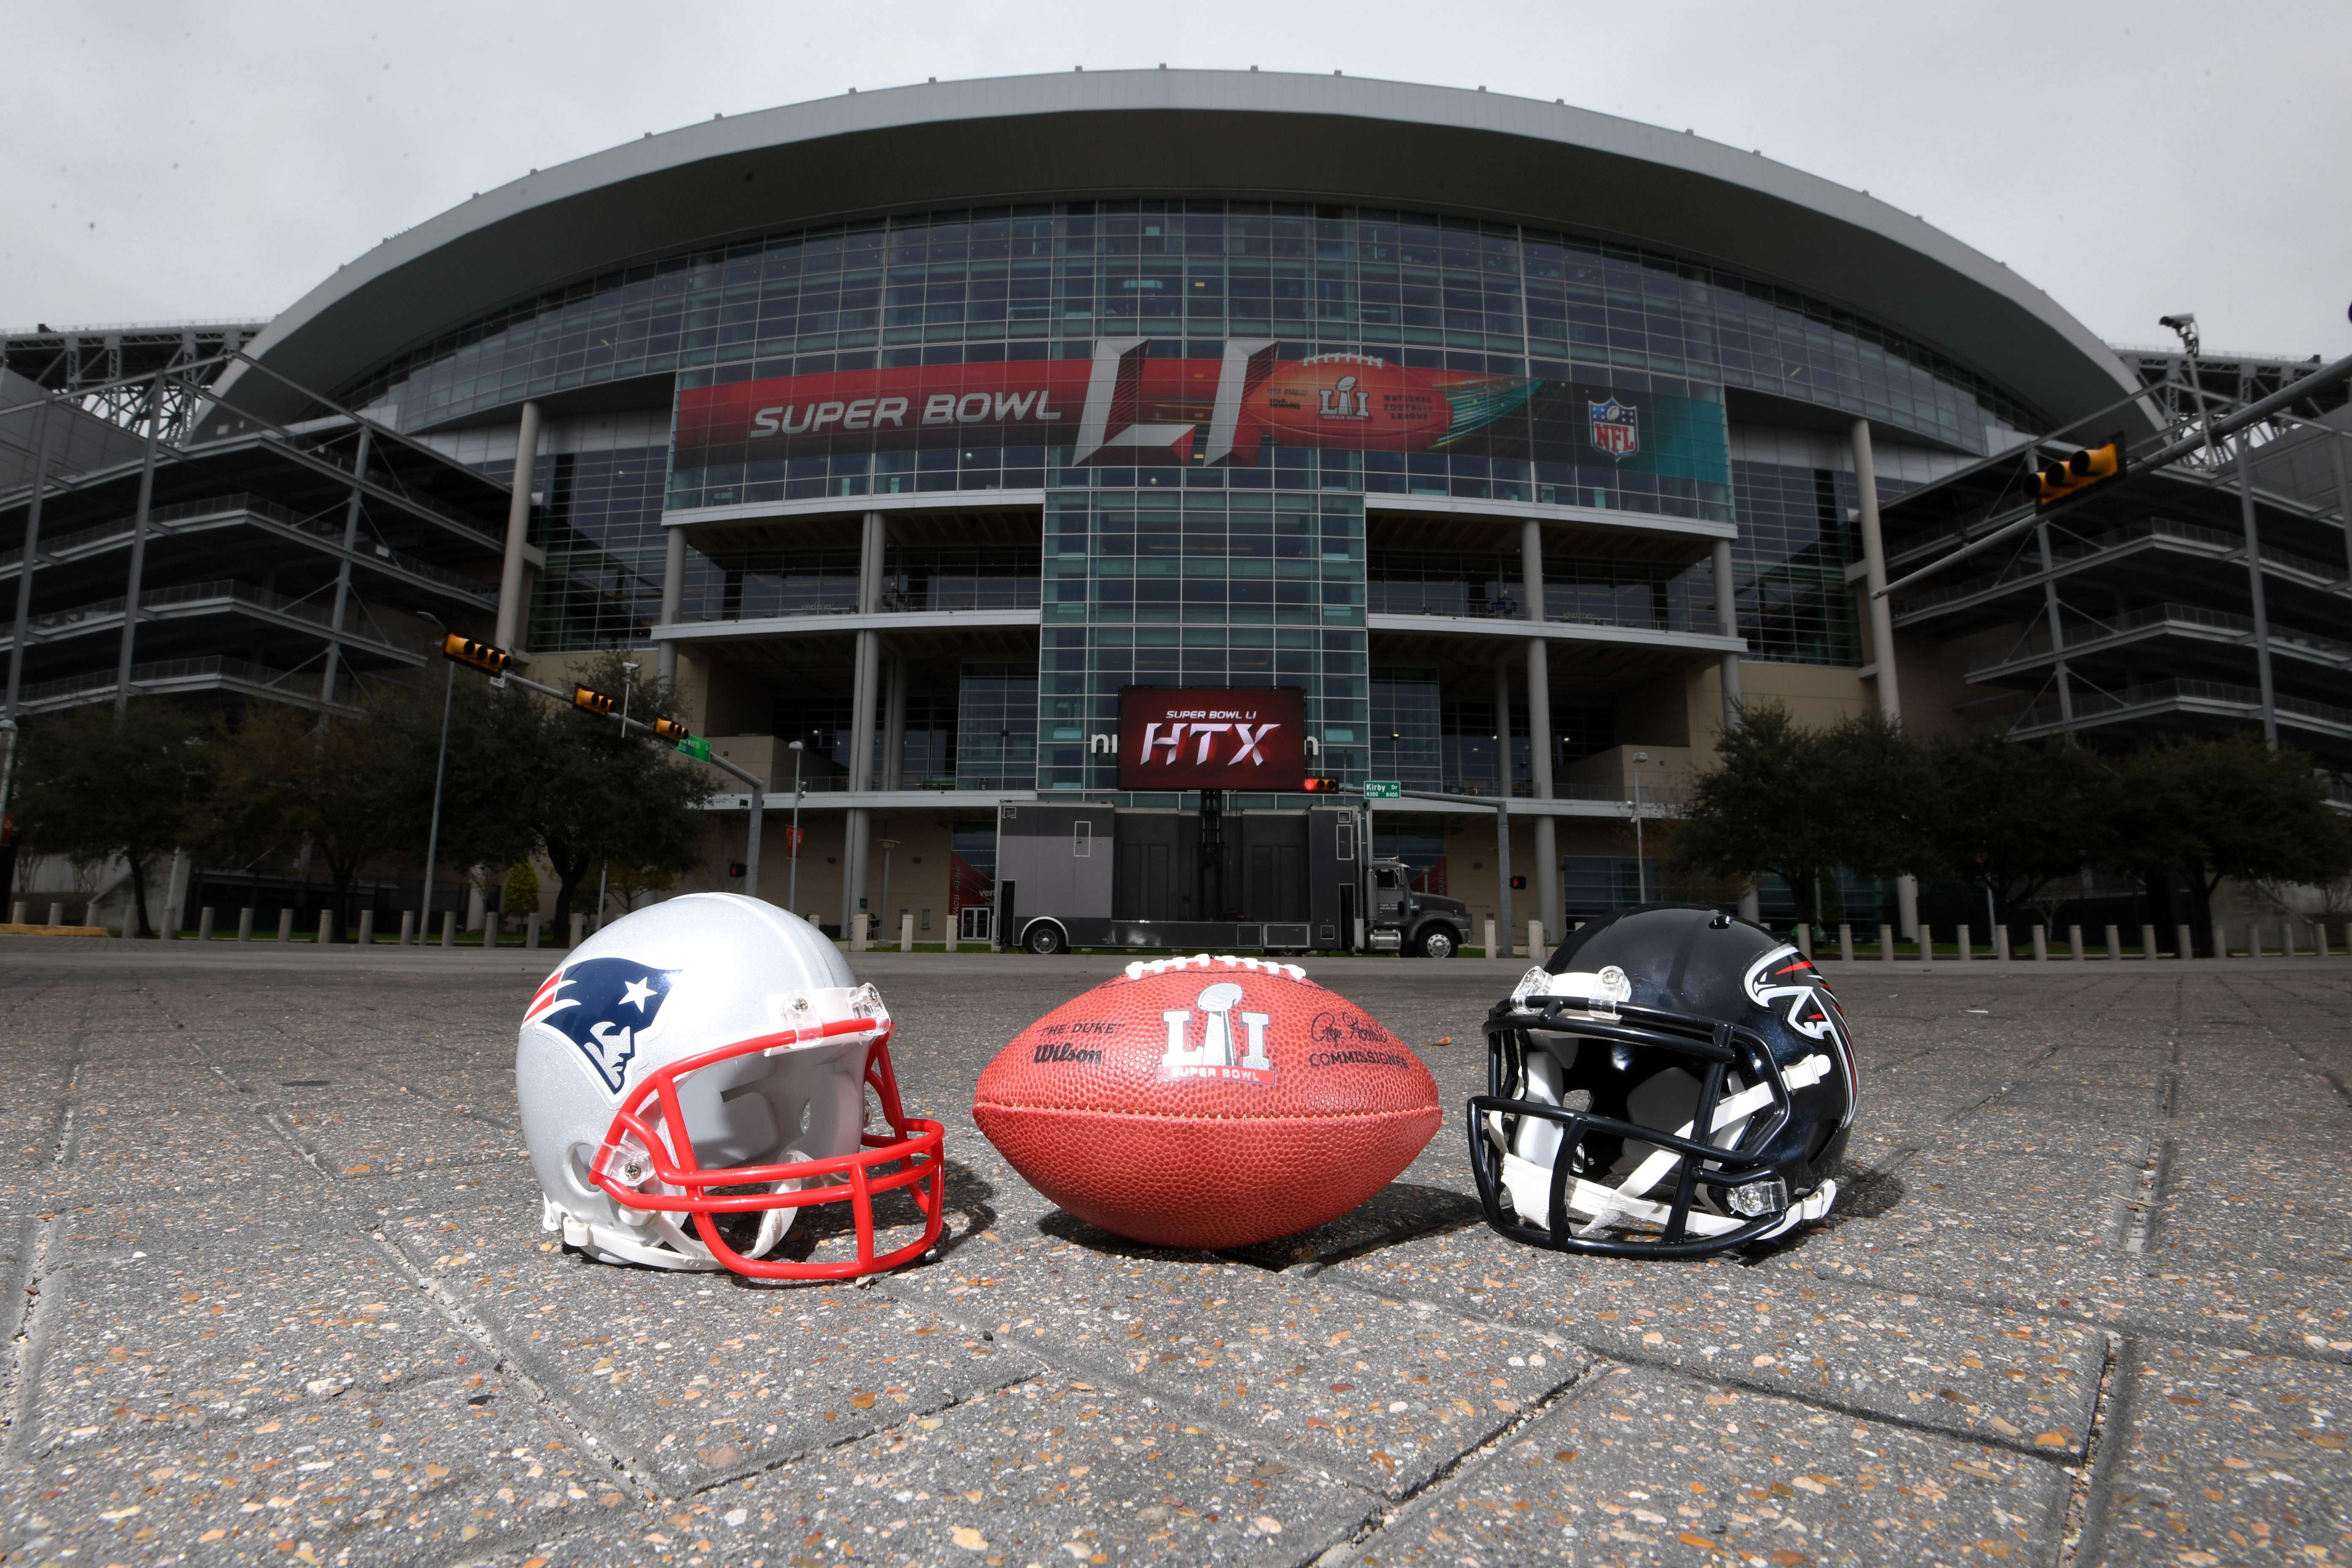 The New England Patriots will clash against the Atlanta Falcons for Super Bowl LI. But where can you catch the action? Photo: USA Today